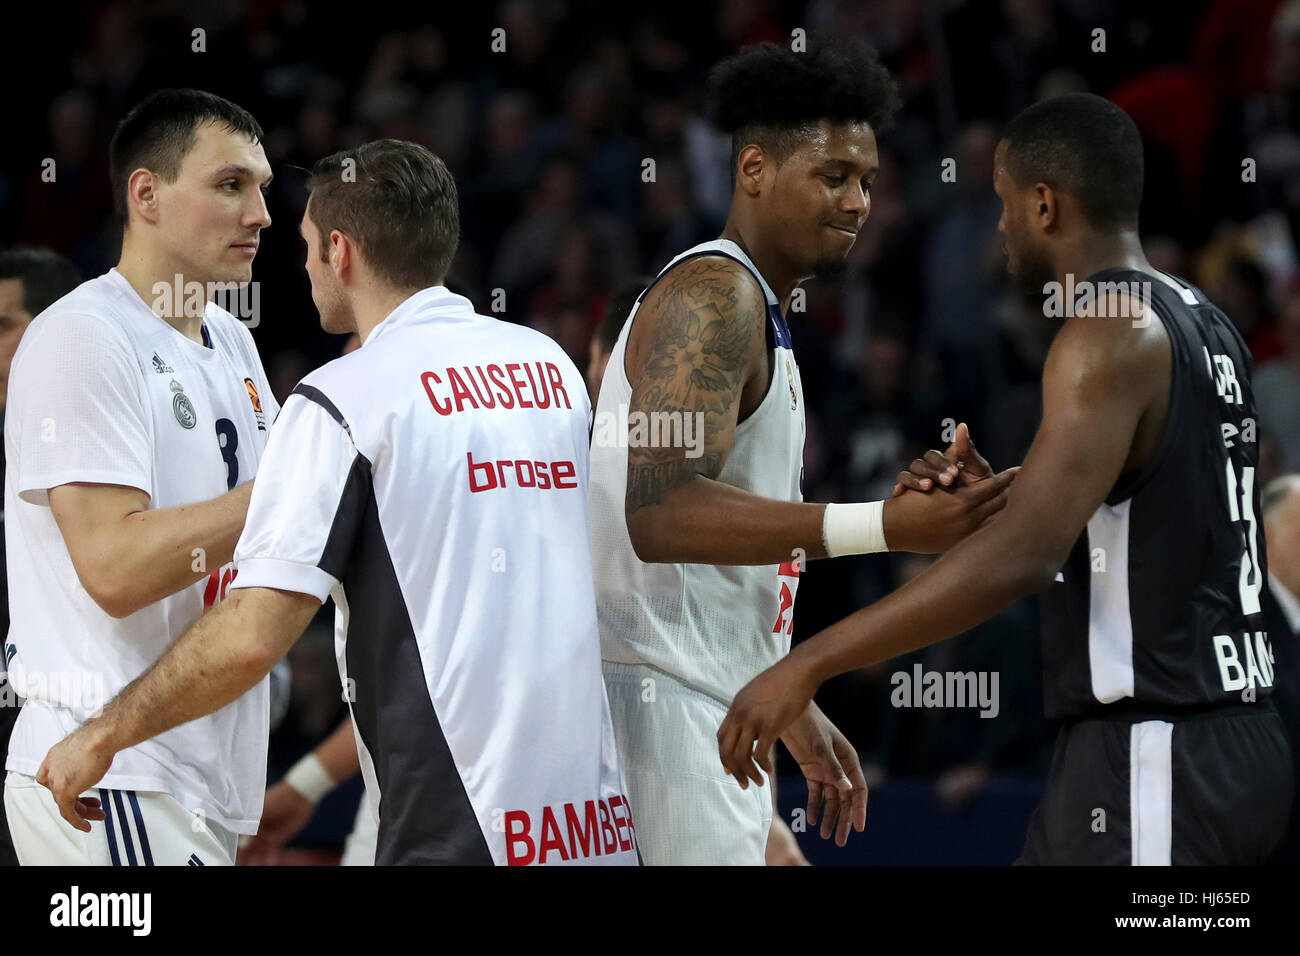 Nuremberg, Germany. 25th Jan, 2017. Bamberg's Fabien Causeur (2.f.L.) and Darius Miller (R) shake hands with Madrid's Jonas Maciulis (L) and Trey Thompkins after the Euroleague basketball game between Brose Bamberg and Real Madrid in the Arena Nuernberg in Nuremberg, Germany, 25 January 2017. Photo: Daniel Karmann/dpa/Alamy Live News Stock Photo